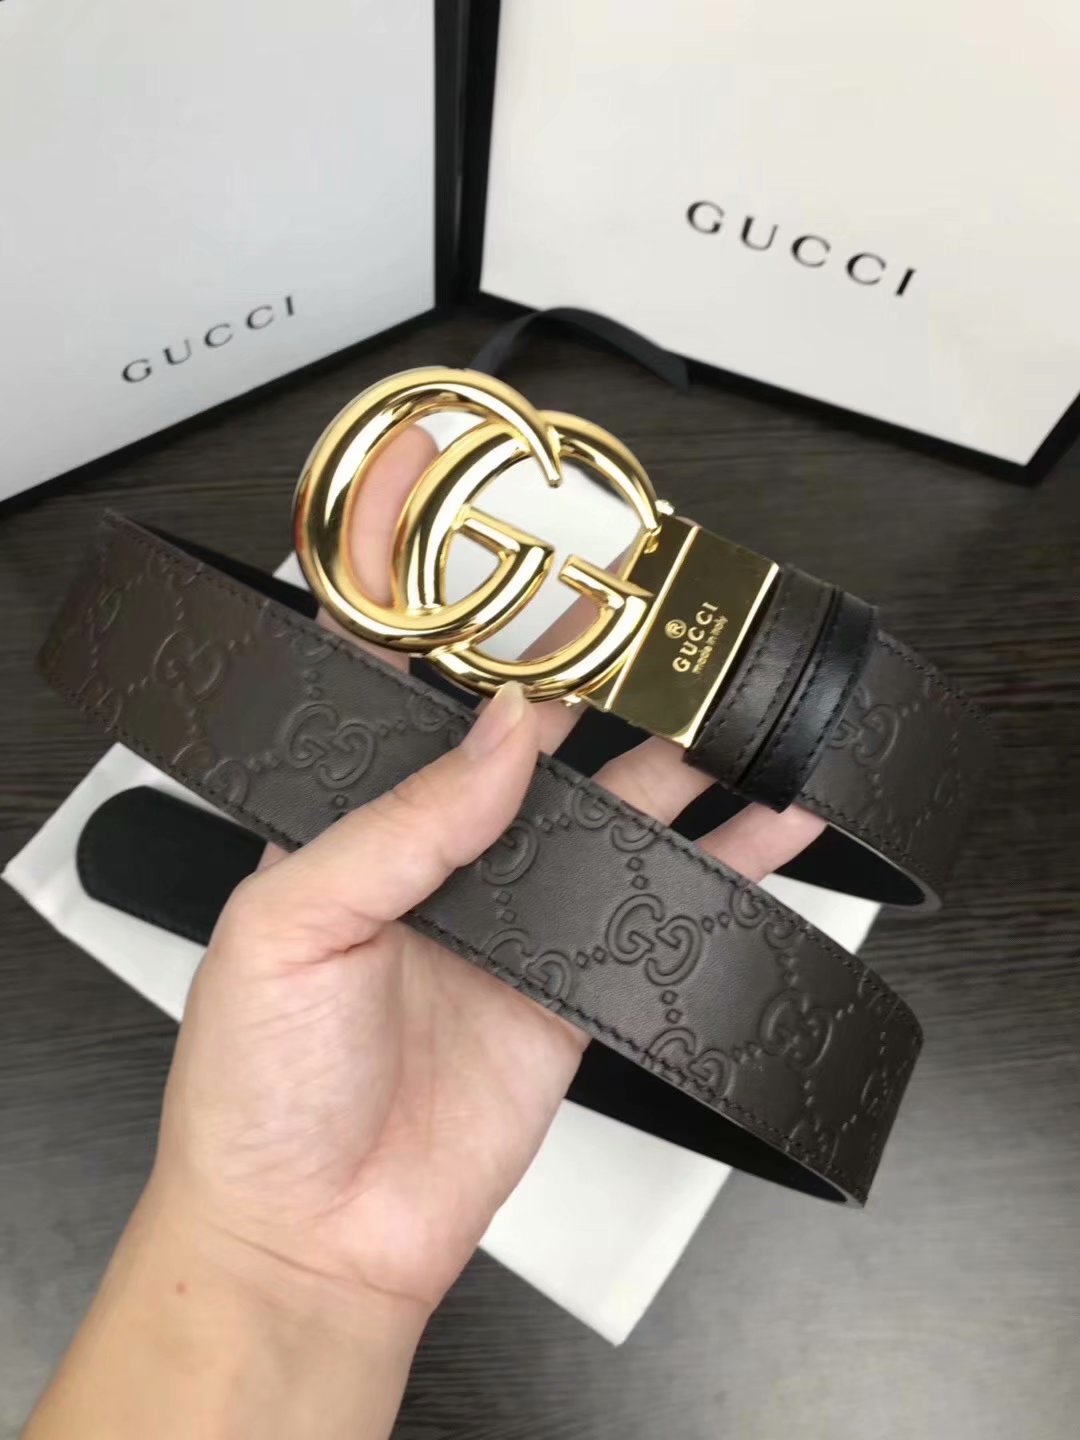 Cheap Replica Gucci Men Leather Belt Width 3.8cm With Silver Buckle 065